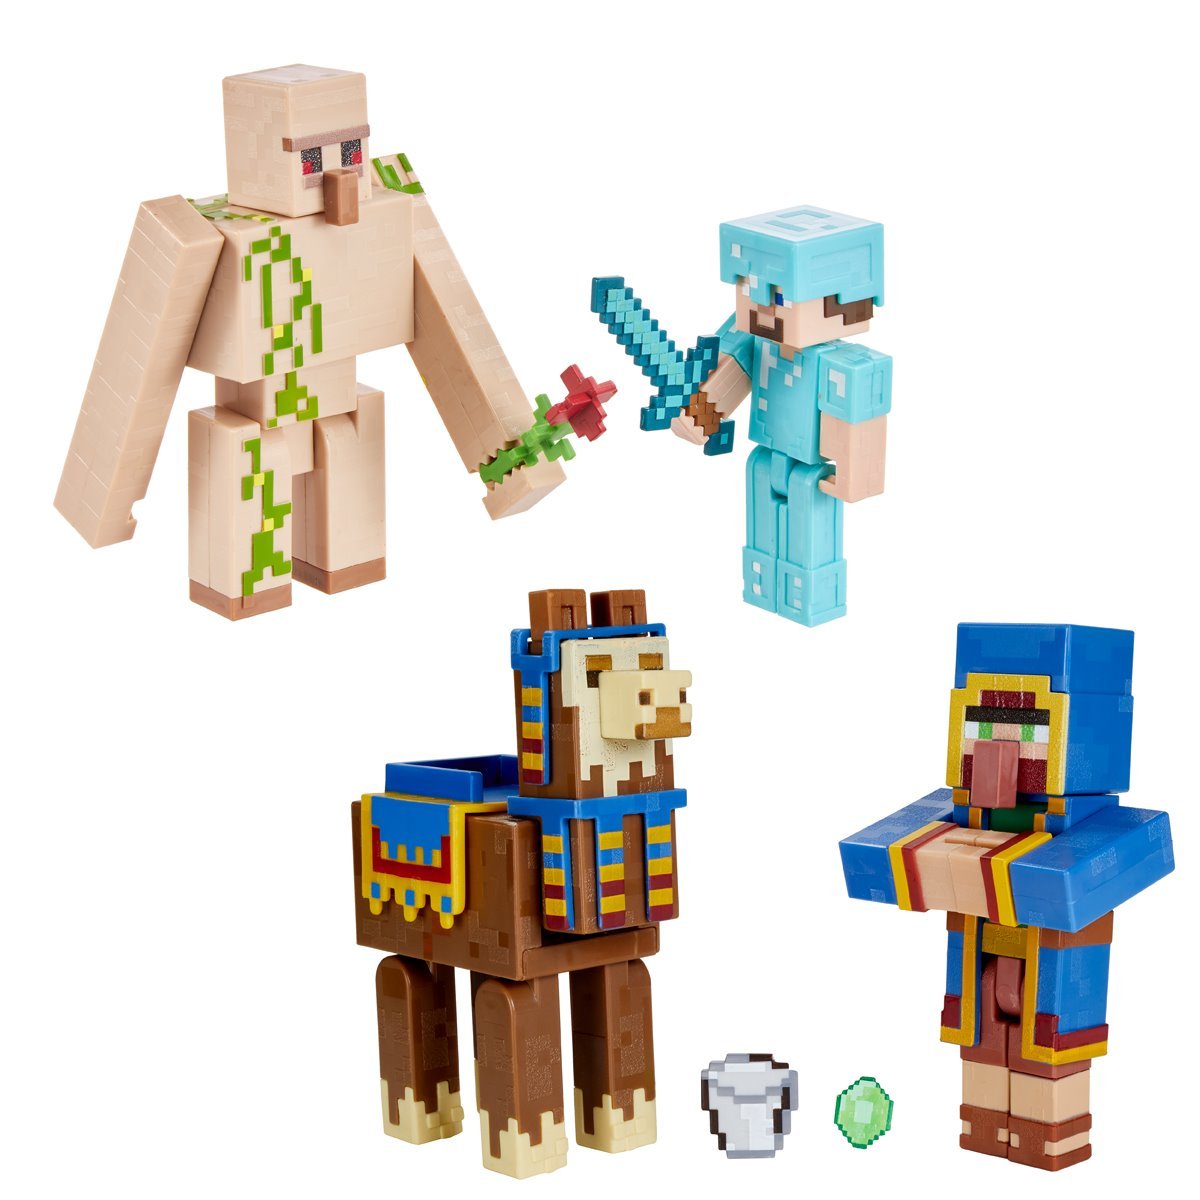 DrekanZ 🔨 on X: Check out my new Kaela Figure I have in minecraft!!! This  is a resource pack to replace Totem of Undying in minecraft 1.20. It will  automatically replace the